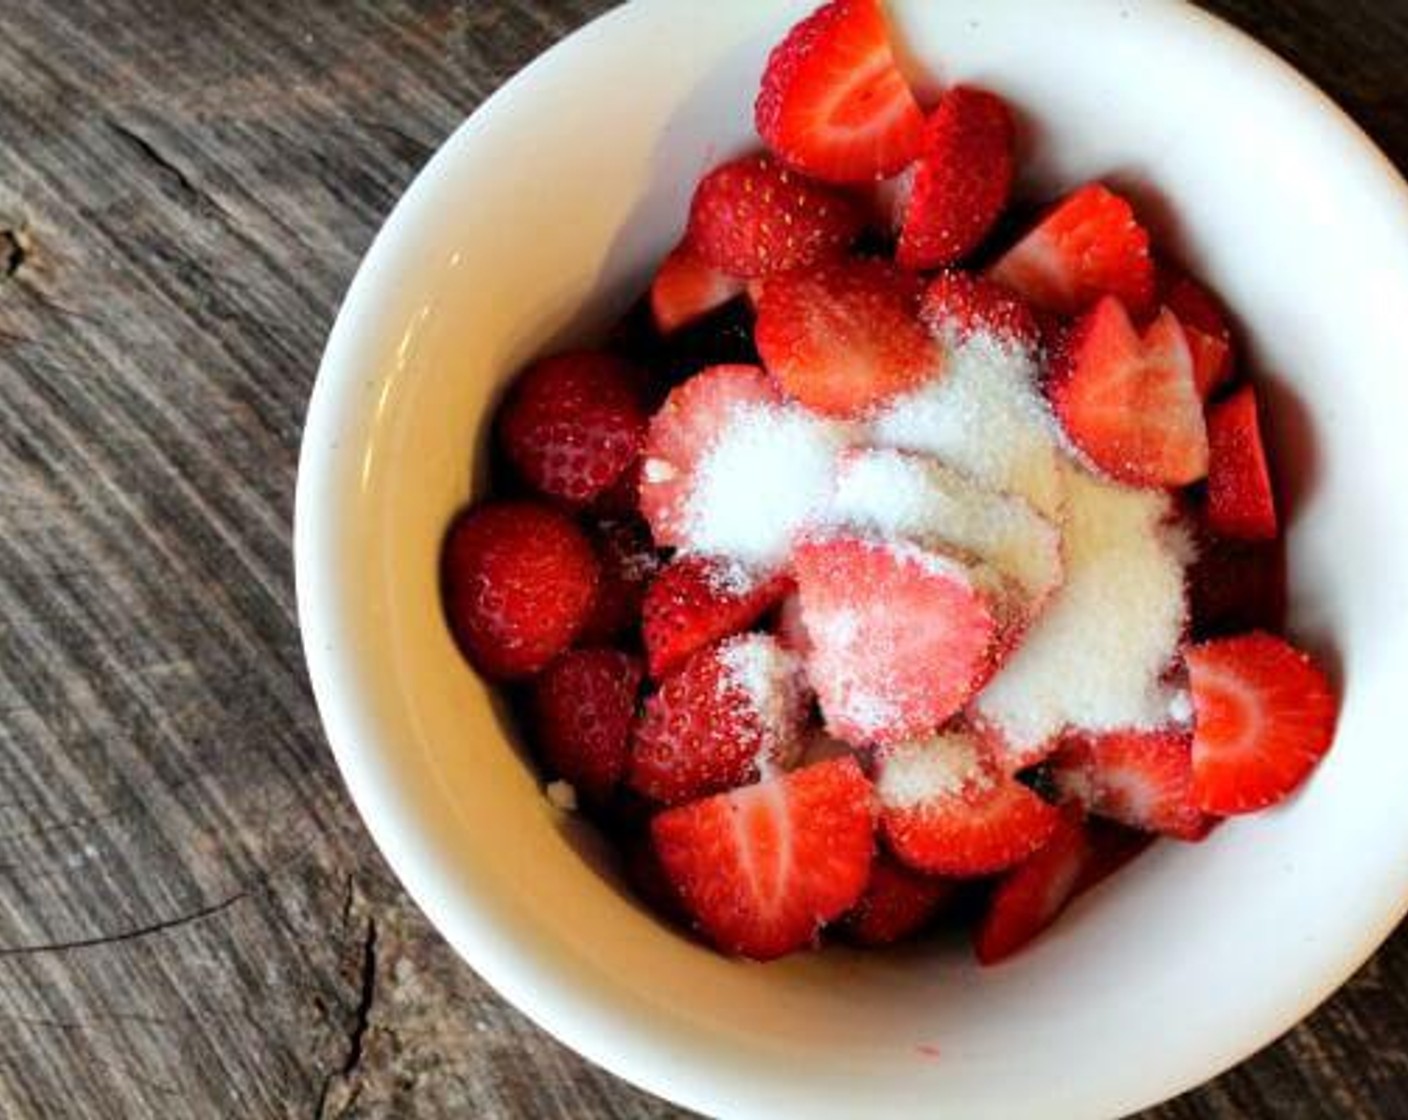 step 1 In a medium bowl, add Fresh Strawberries (3 cups) and Granulated Sugar (2 Tbsp), stir, and set aside. Stir occasionally to distribute the sugar.